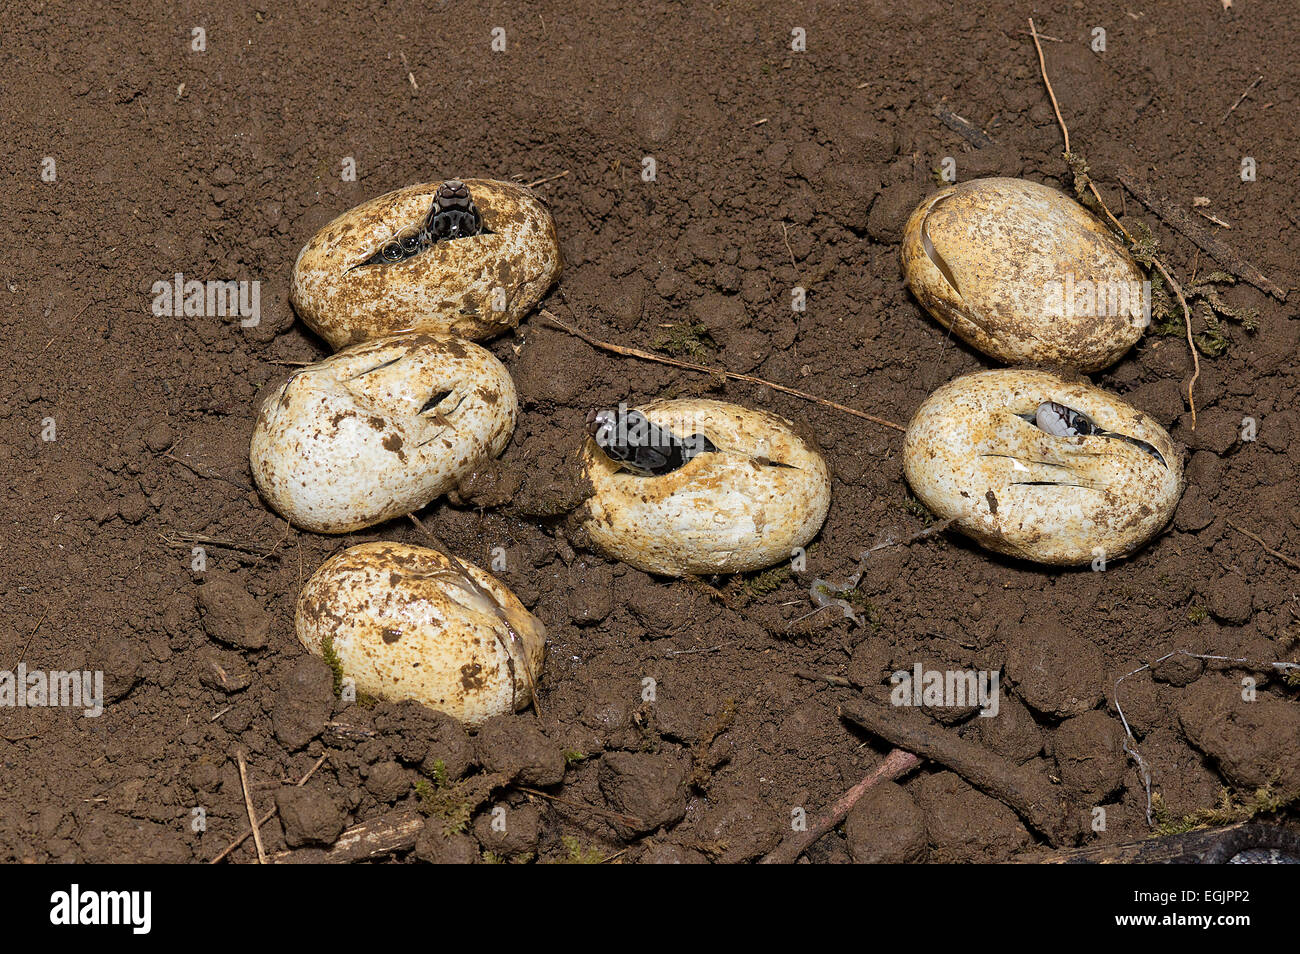 northern black racer, Coluber constrictor constrictor, eggs hatching, with young, north american reptile, snake, constrictor Stock Photo